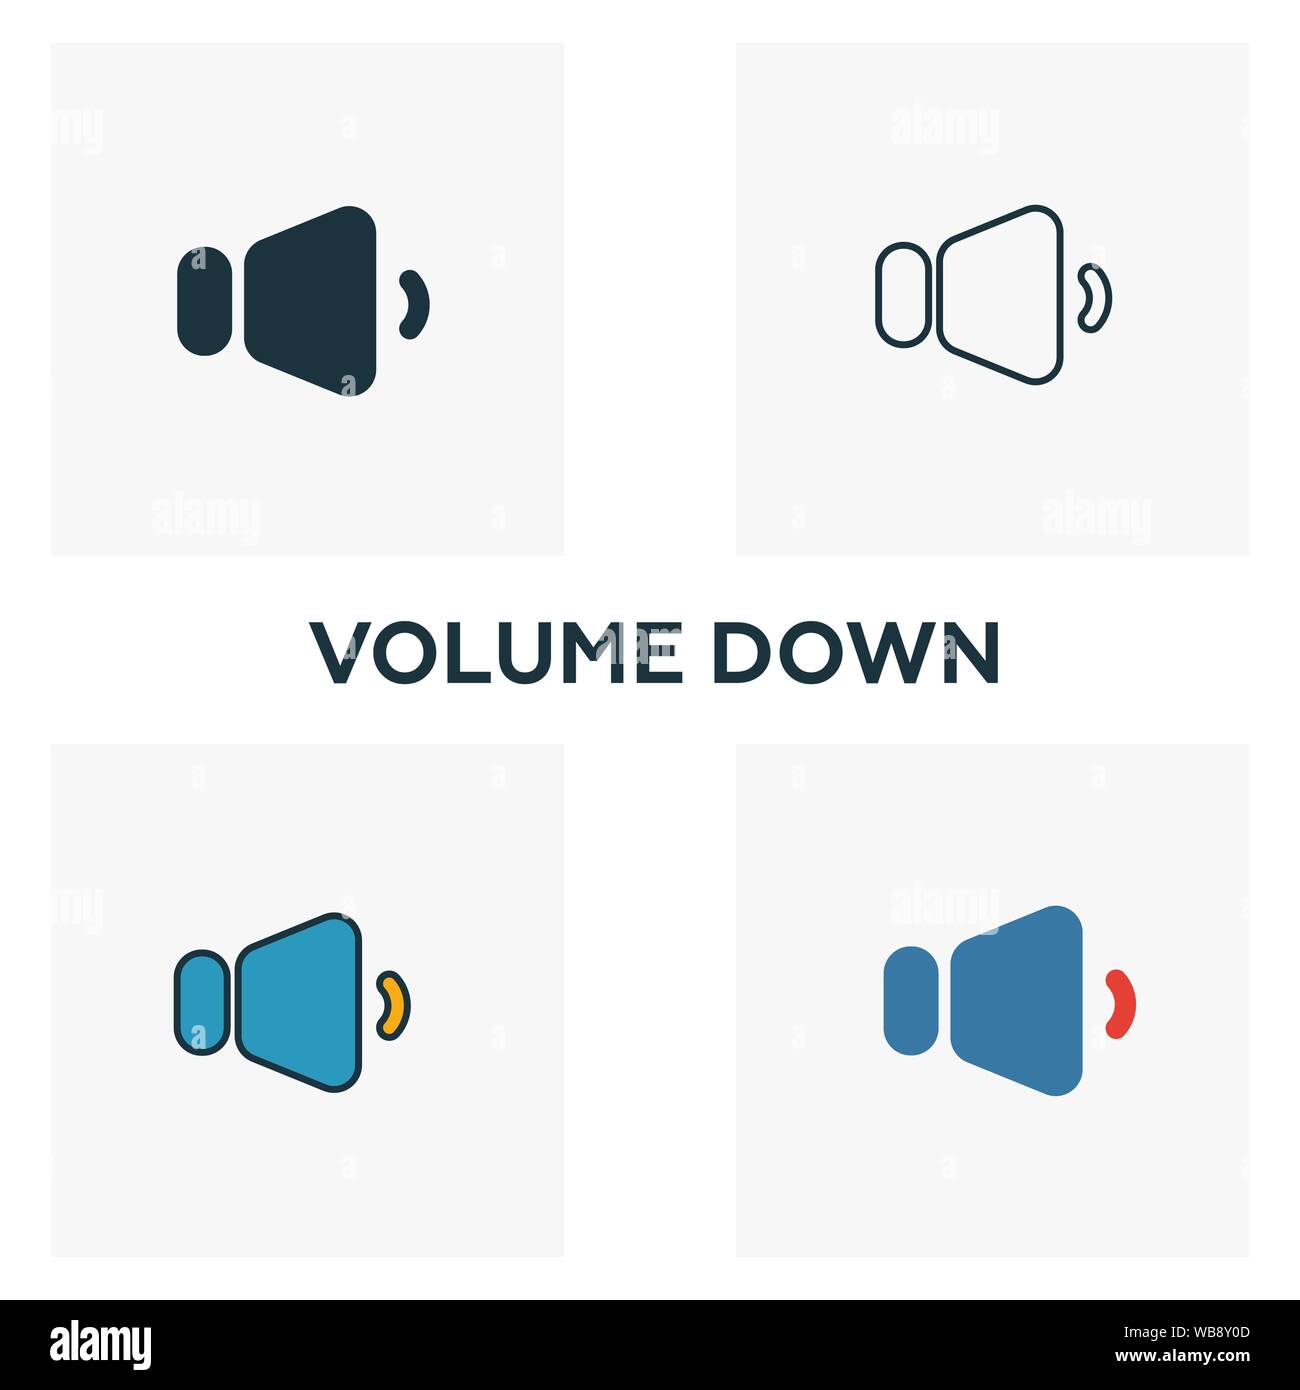 Volume Down icon set. Four elements in diferent styles from audio buttons icons collection. Creative volume down icons filled, outline, colored and Stock Vector